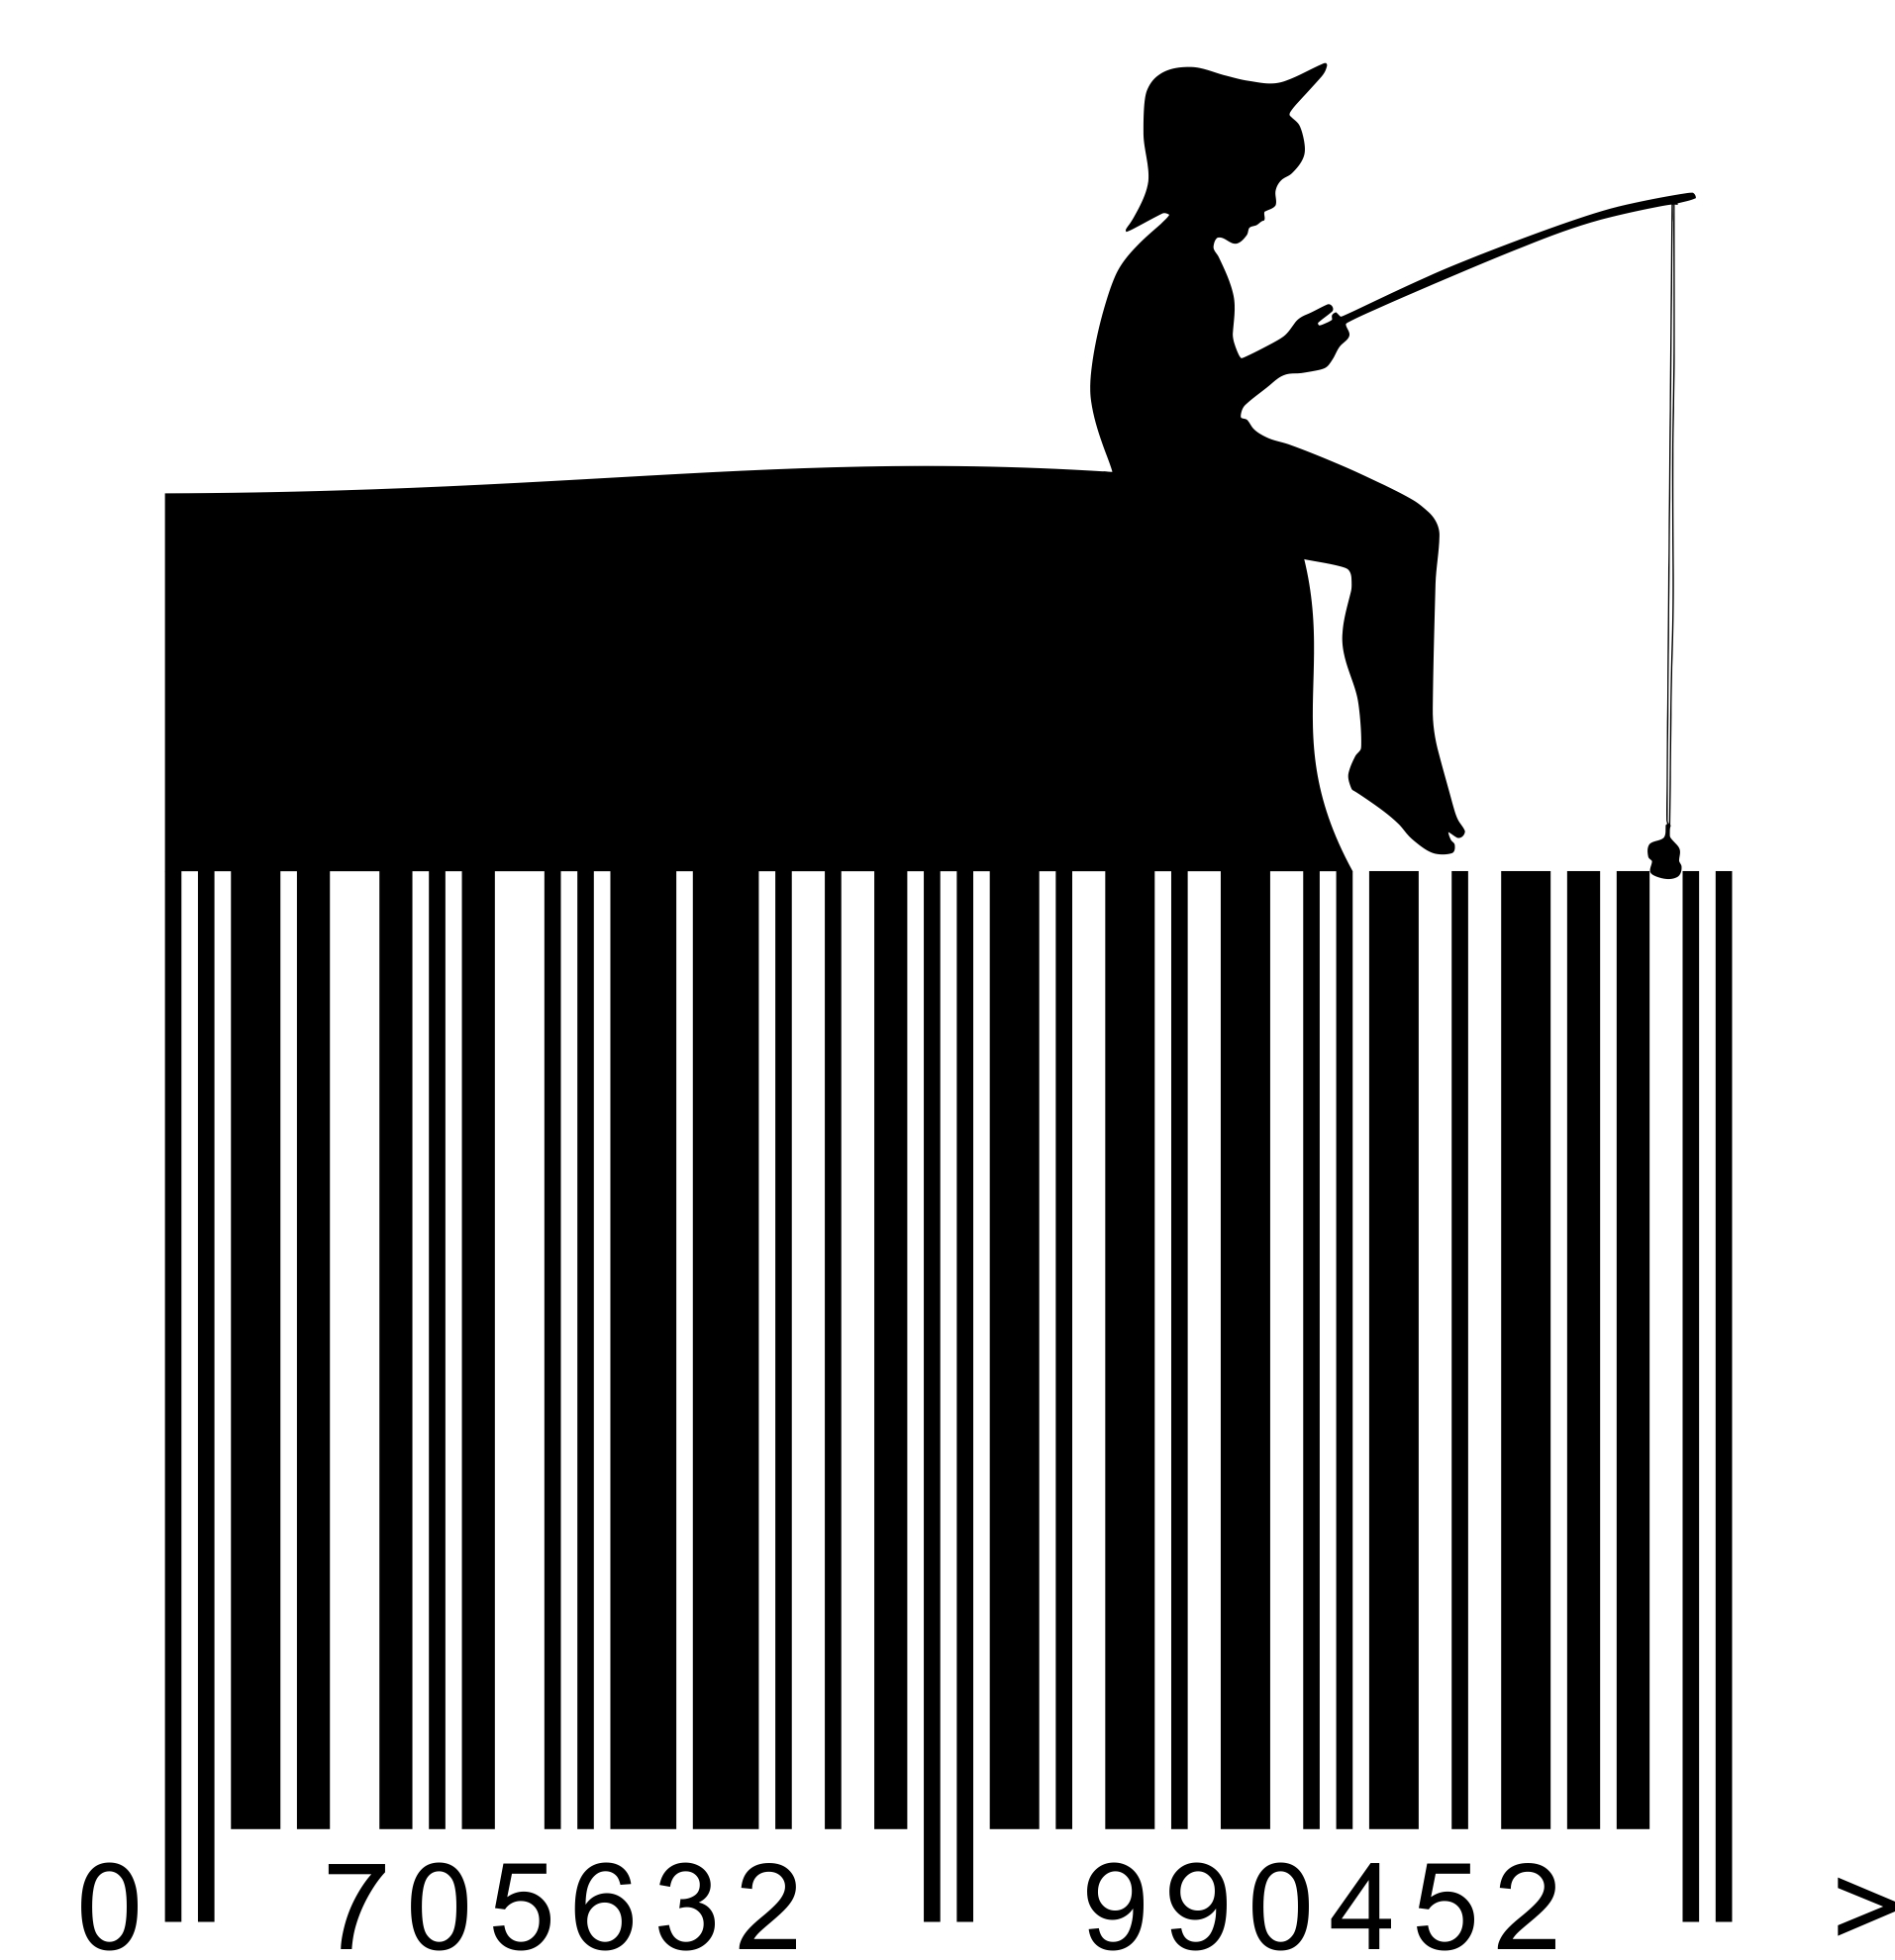 Barcode clipart snack, Picture #2288735 barcode clipart snack